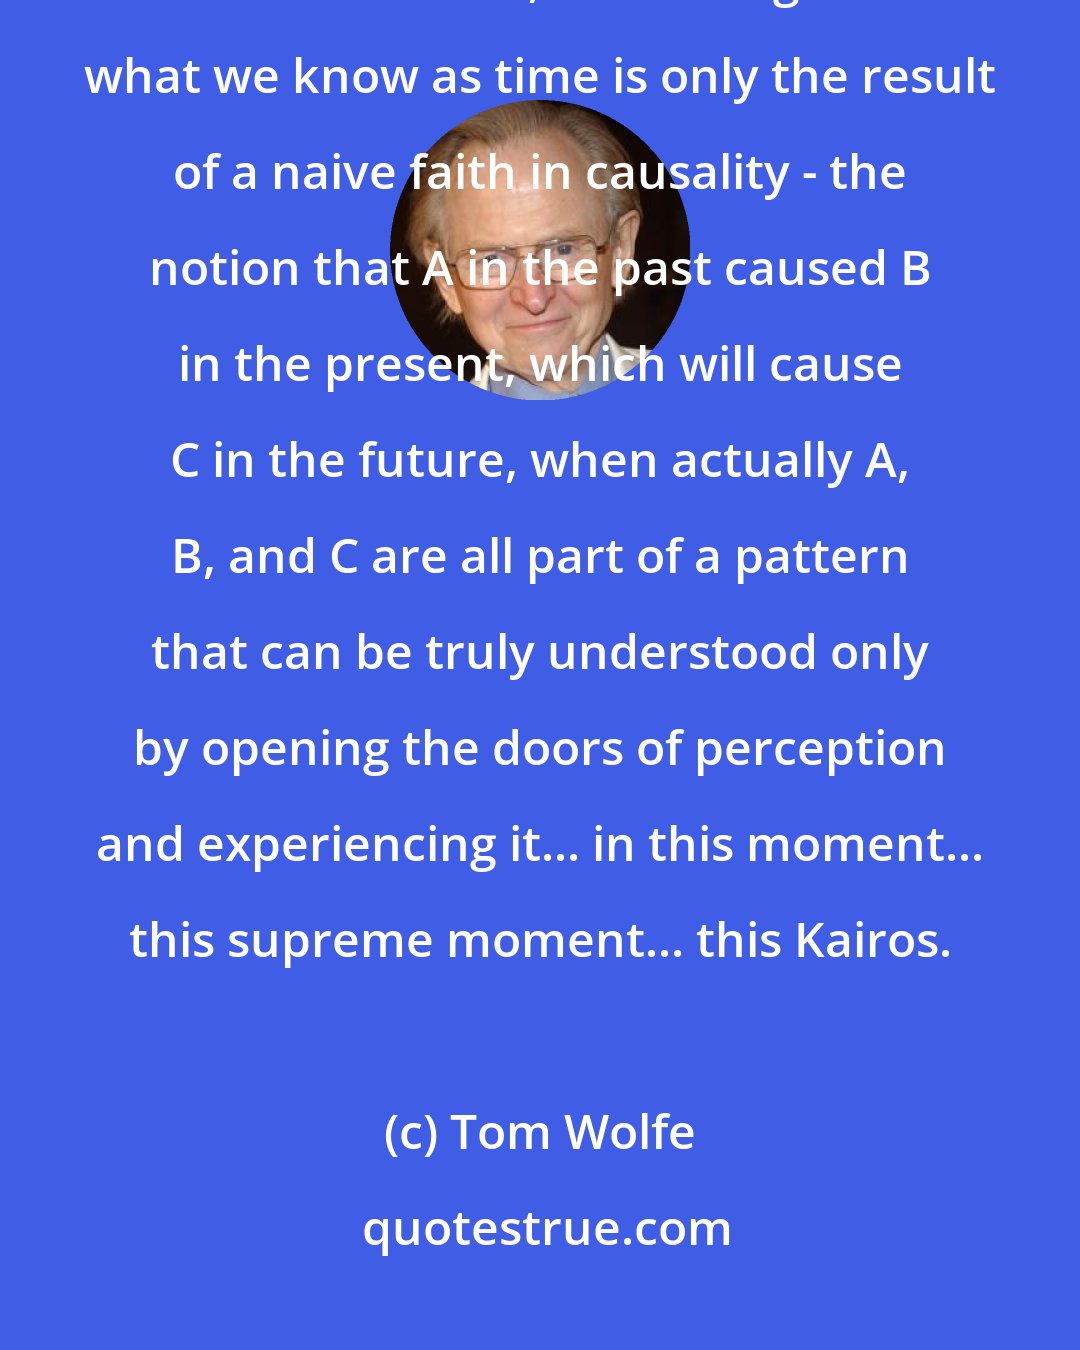 Tom Wolfe: a perception of the cosmic unity of this higher level. And a feeling of timelessness, the feeling that what we know as time is only the result of a naive faith in causality - the notion that A in the past caused B in the present, which will cause C in the future, when actually A, B, and C are all part of a pattern that can be truly understood only by opening the doors of perception and experiencing it... in this moment... this supreme moment... this Kairos.